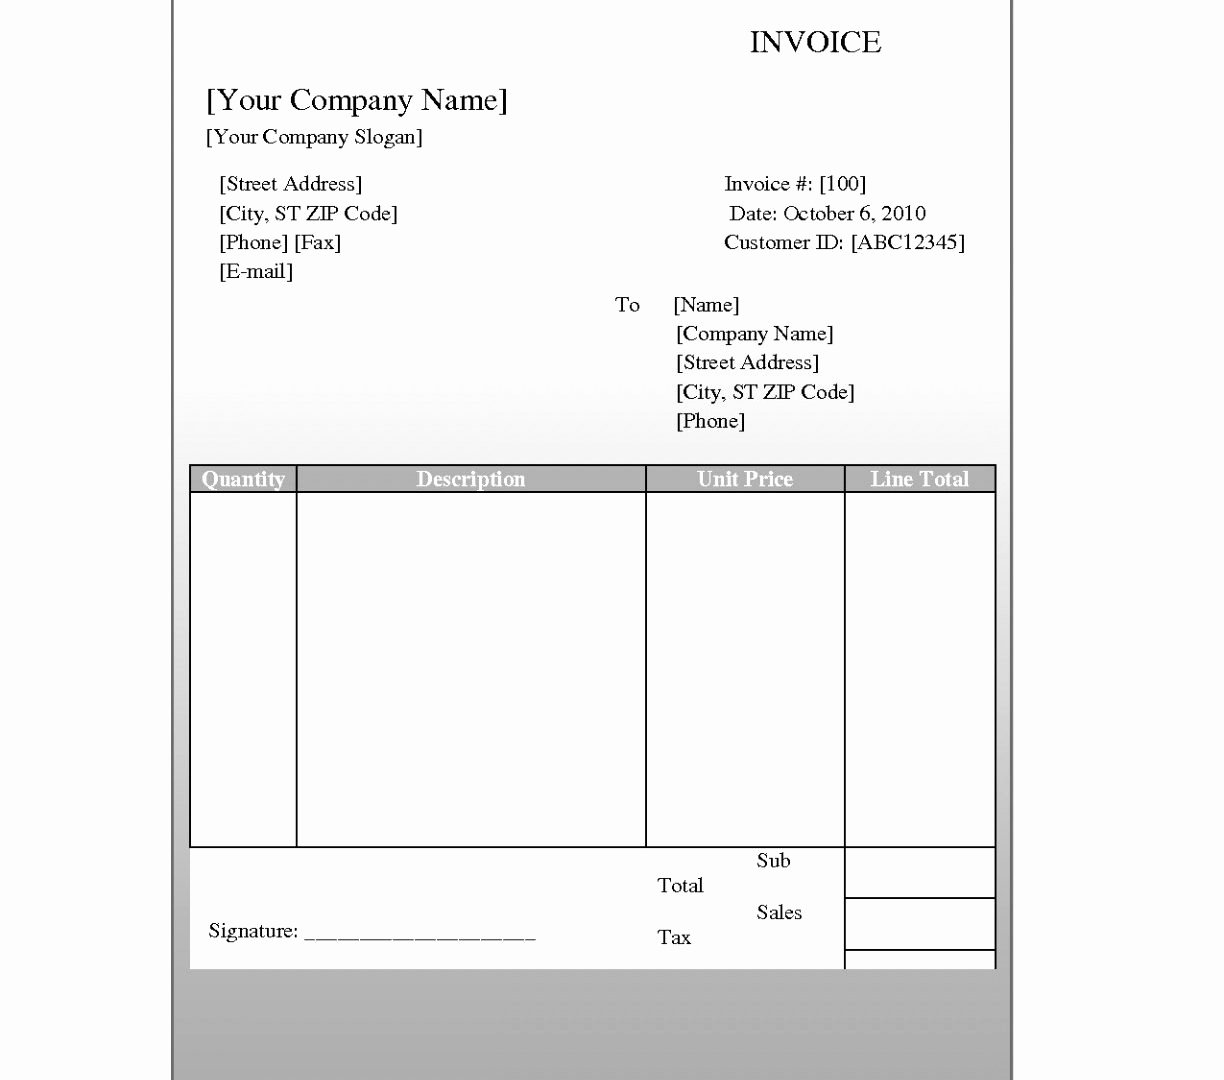 Free Invoice Template for Mac Awesome Types Of Invoice Templates Mac